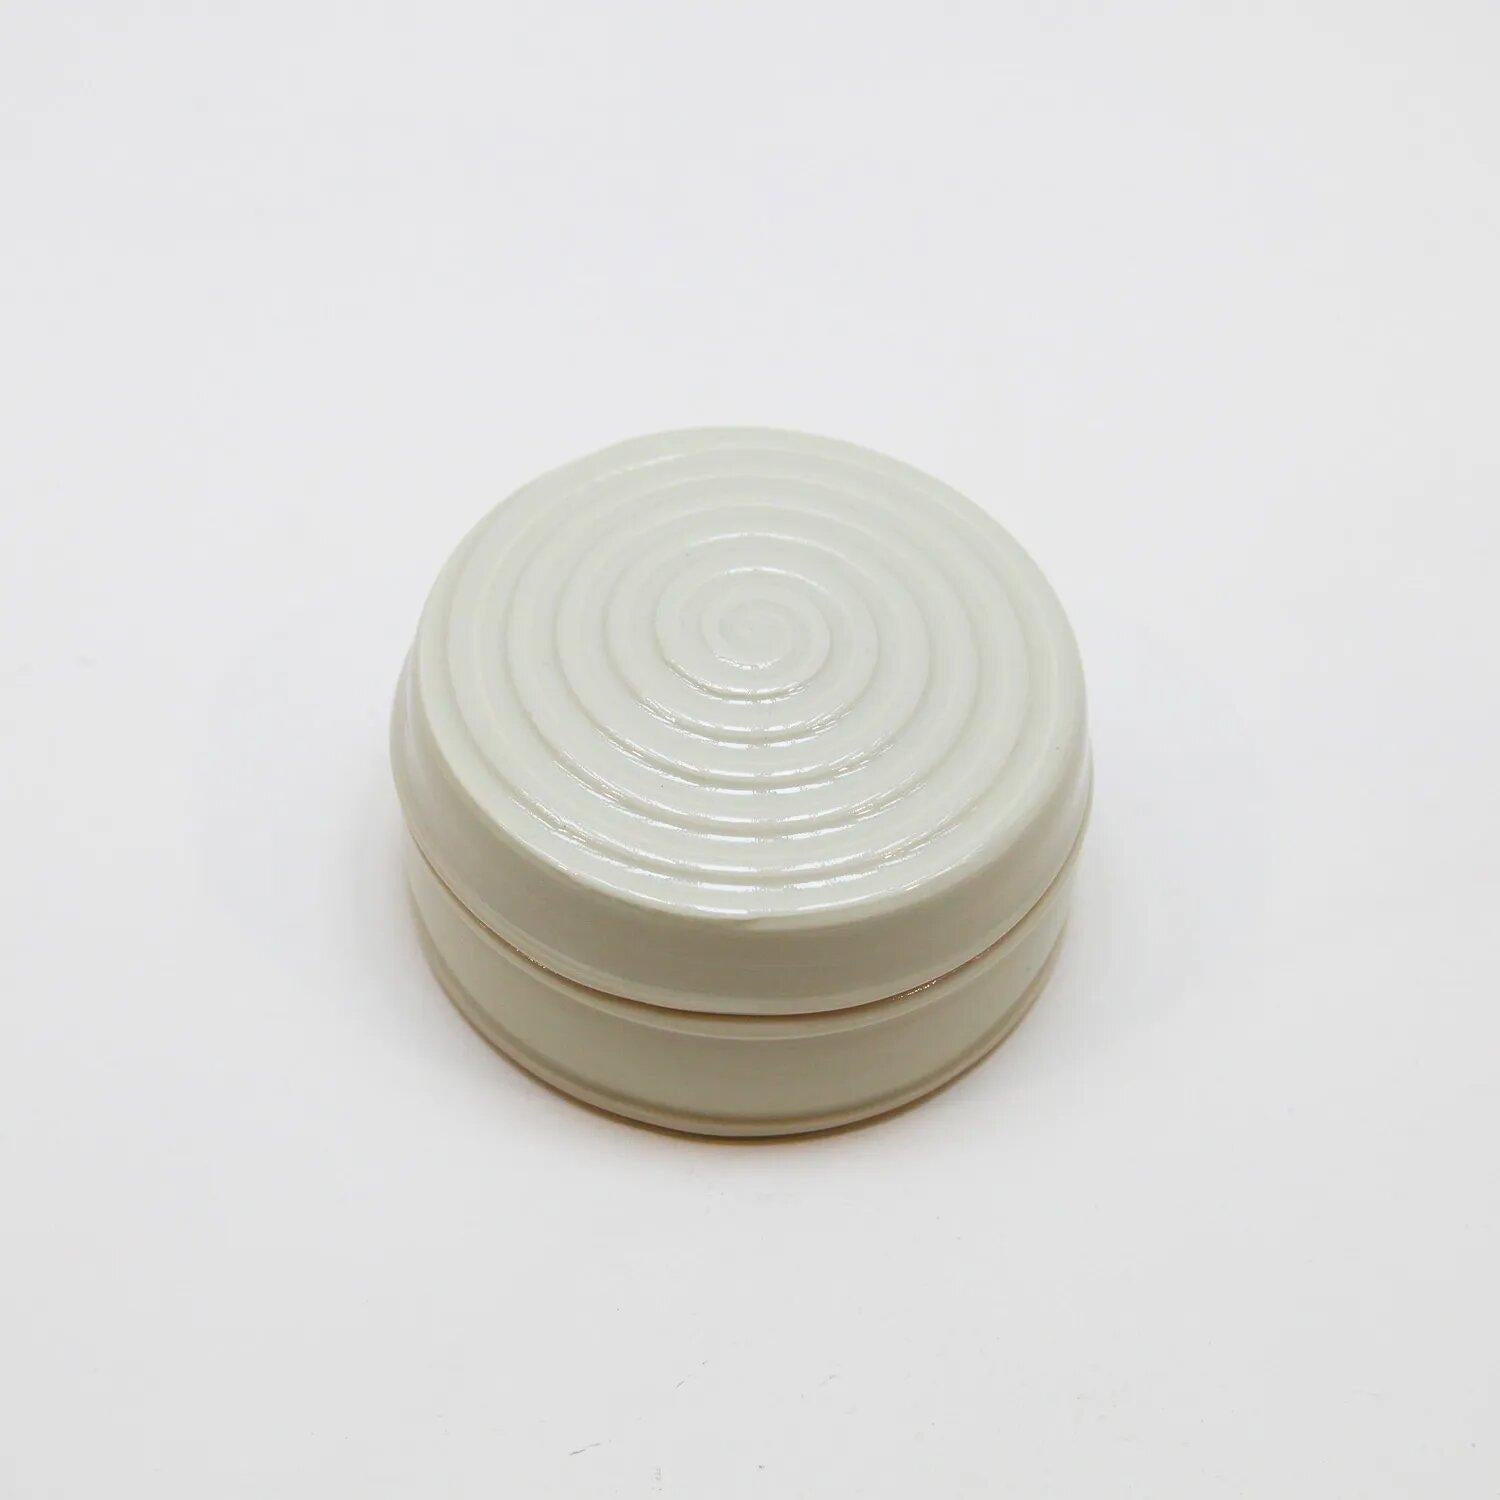 Ceramic White Functional Spiral Lidded Container 